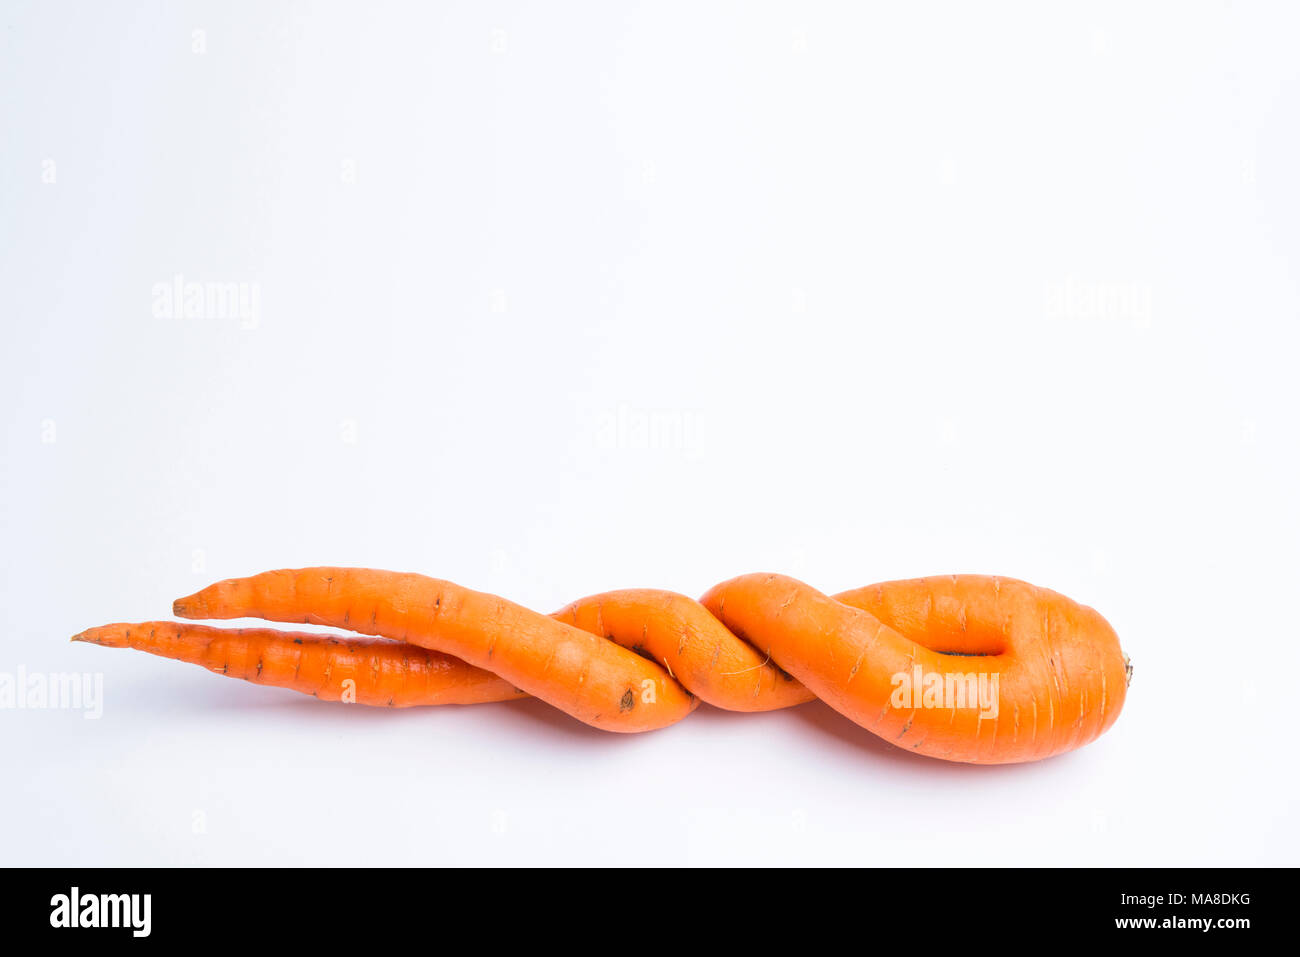 carrots of unusual shape lies on a white background Stock Photo